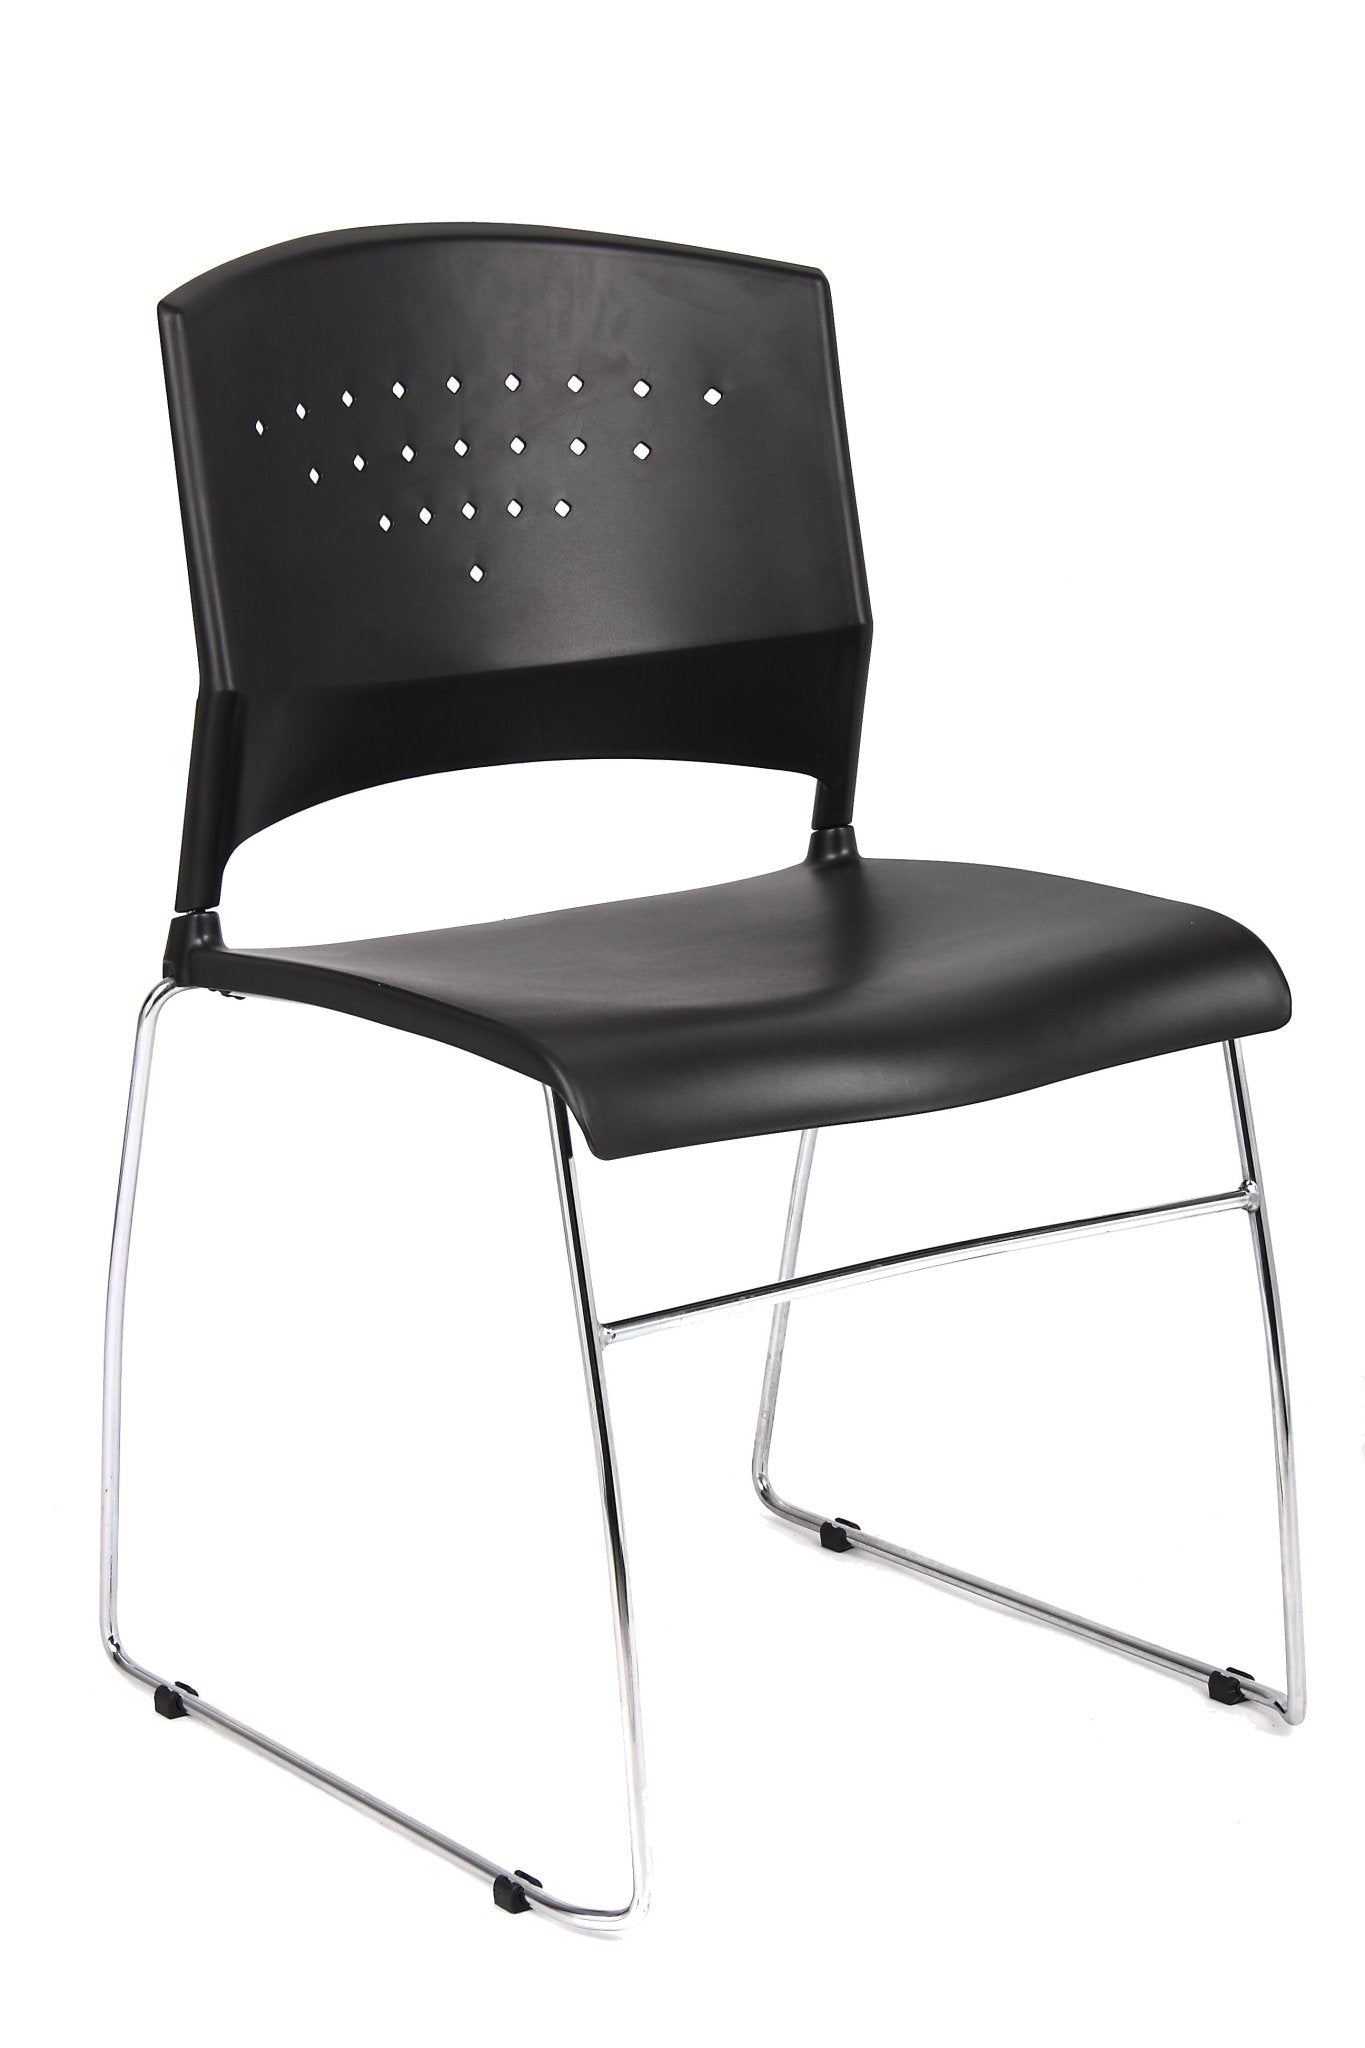 Boss Black Stack Chair With Chrome Frame - 5 Pcs Pack, Black (B1400 - 5) - SchoolOutlet